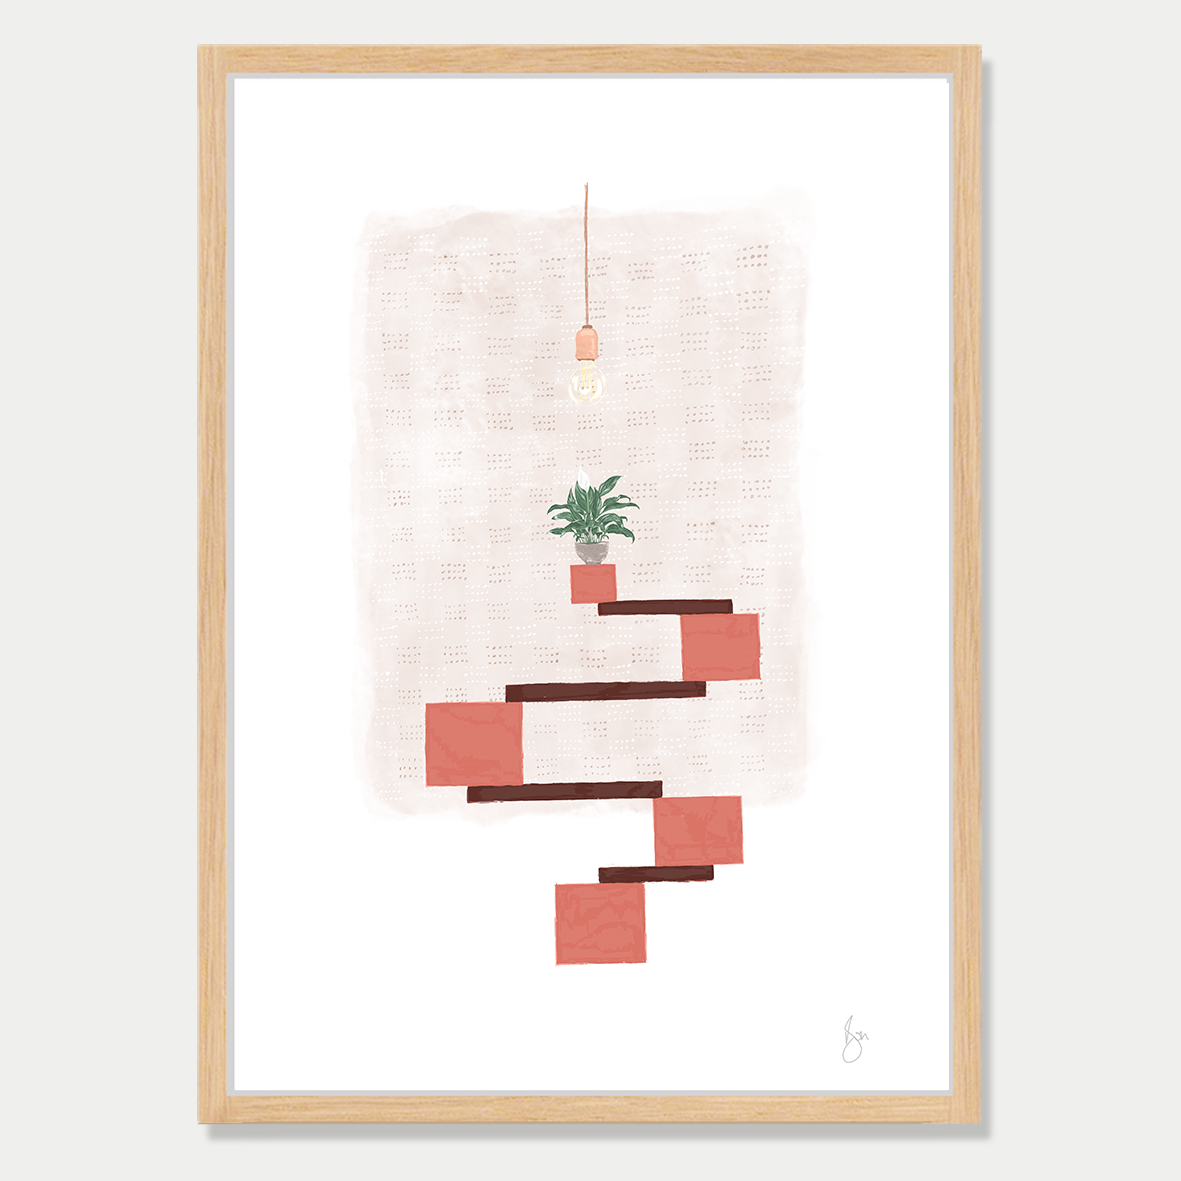 Art print of several blocks balancing with a peace lily sitting on top and a light blub hanging from above, in soft autumn colour palette by Bon Jung. Printed in New Zealand by endemicworld and framed in raw oak.